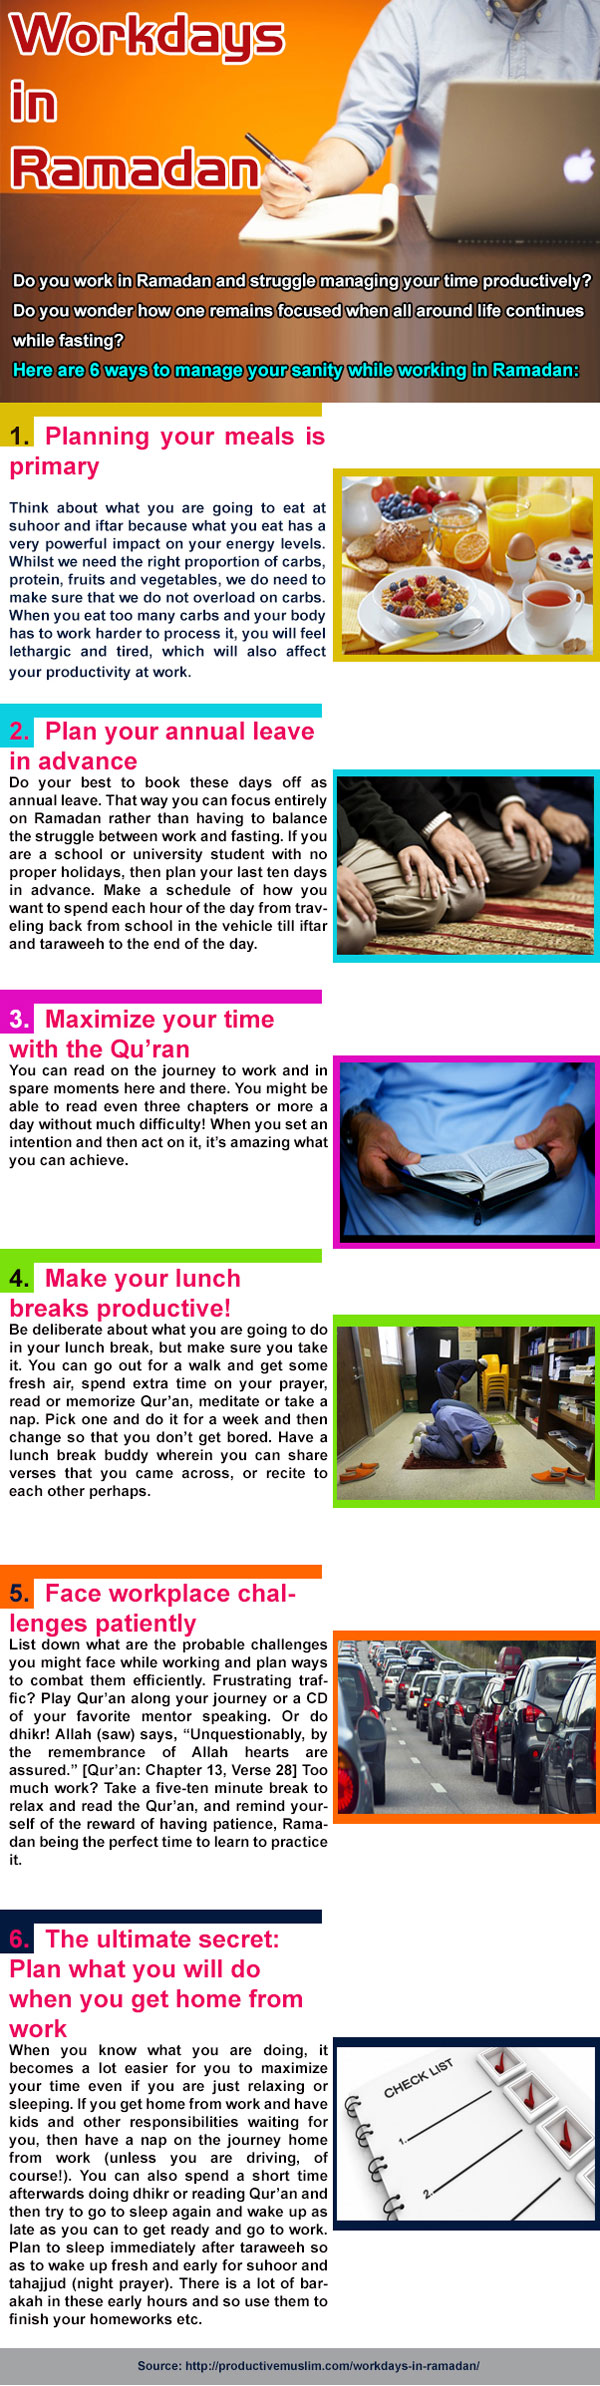 6 Ways to Have a Productive Workday in Ramadan